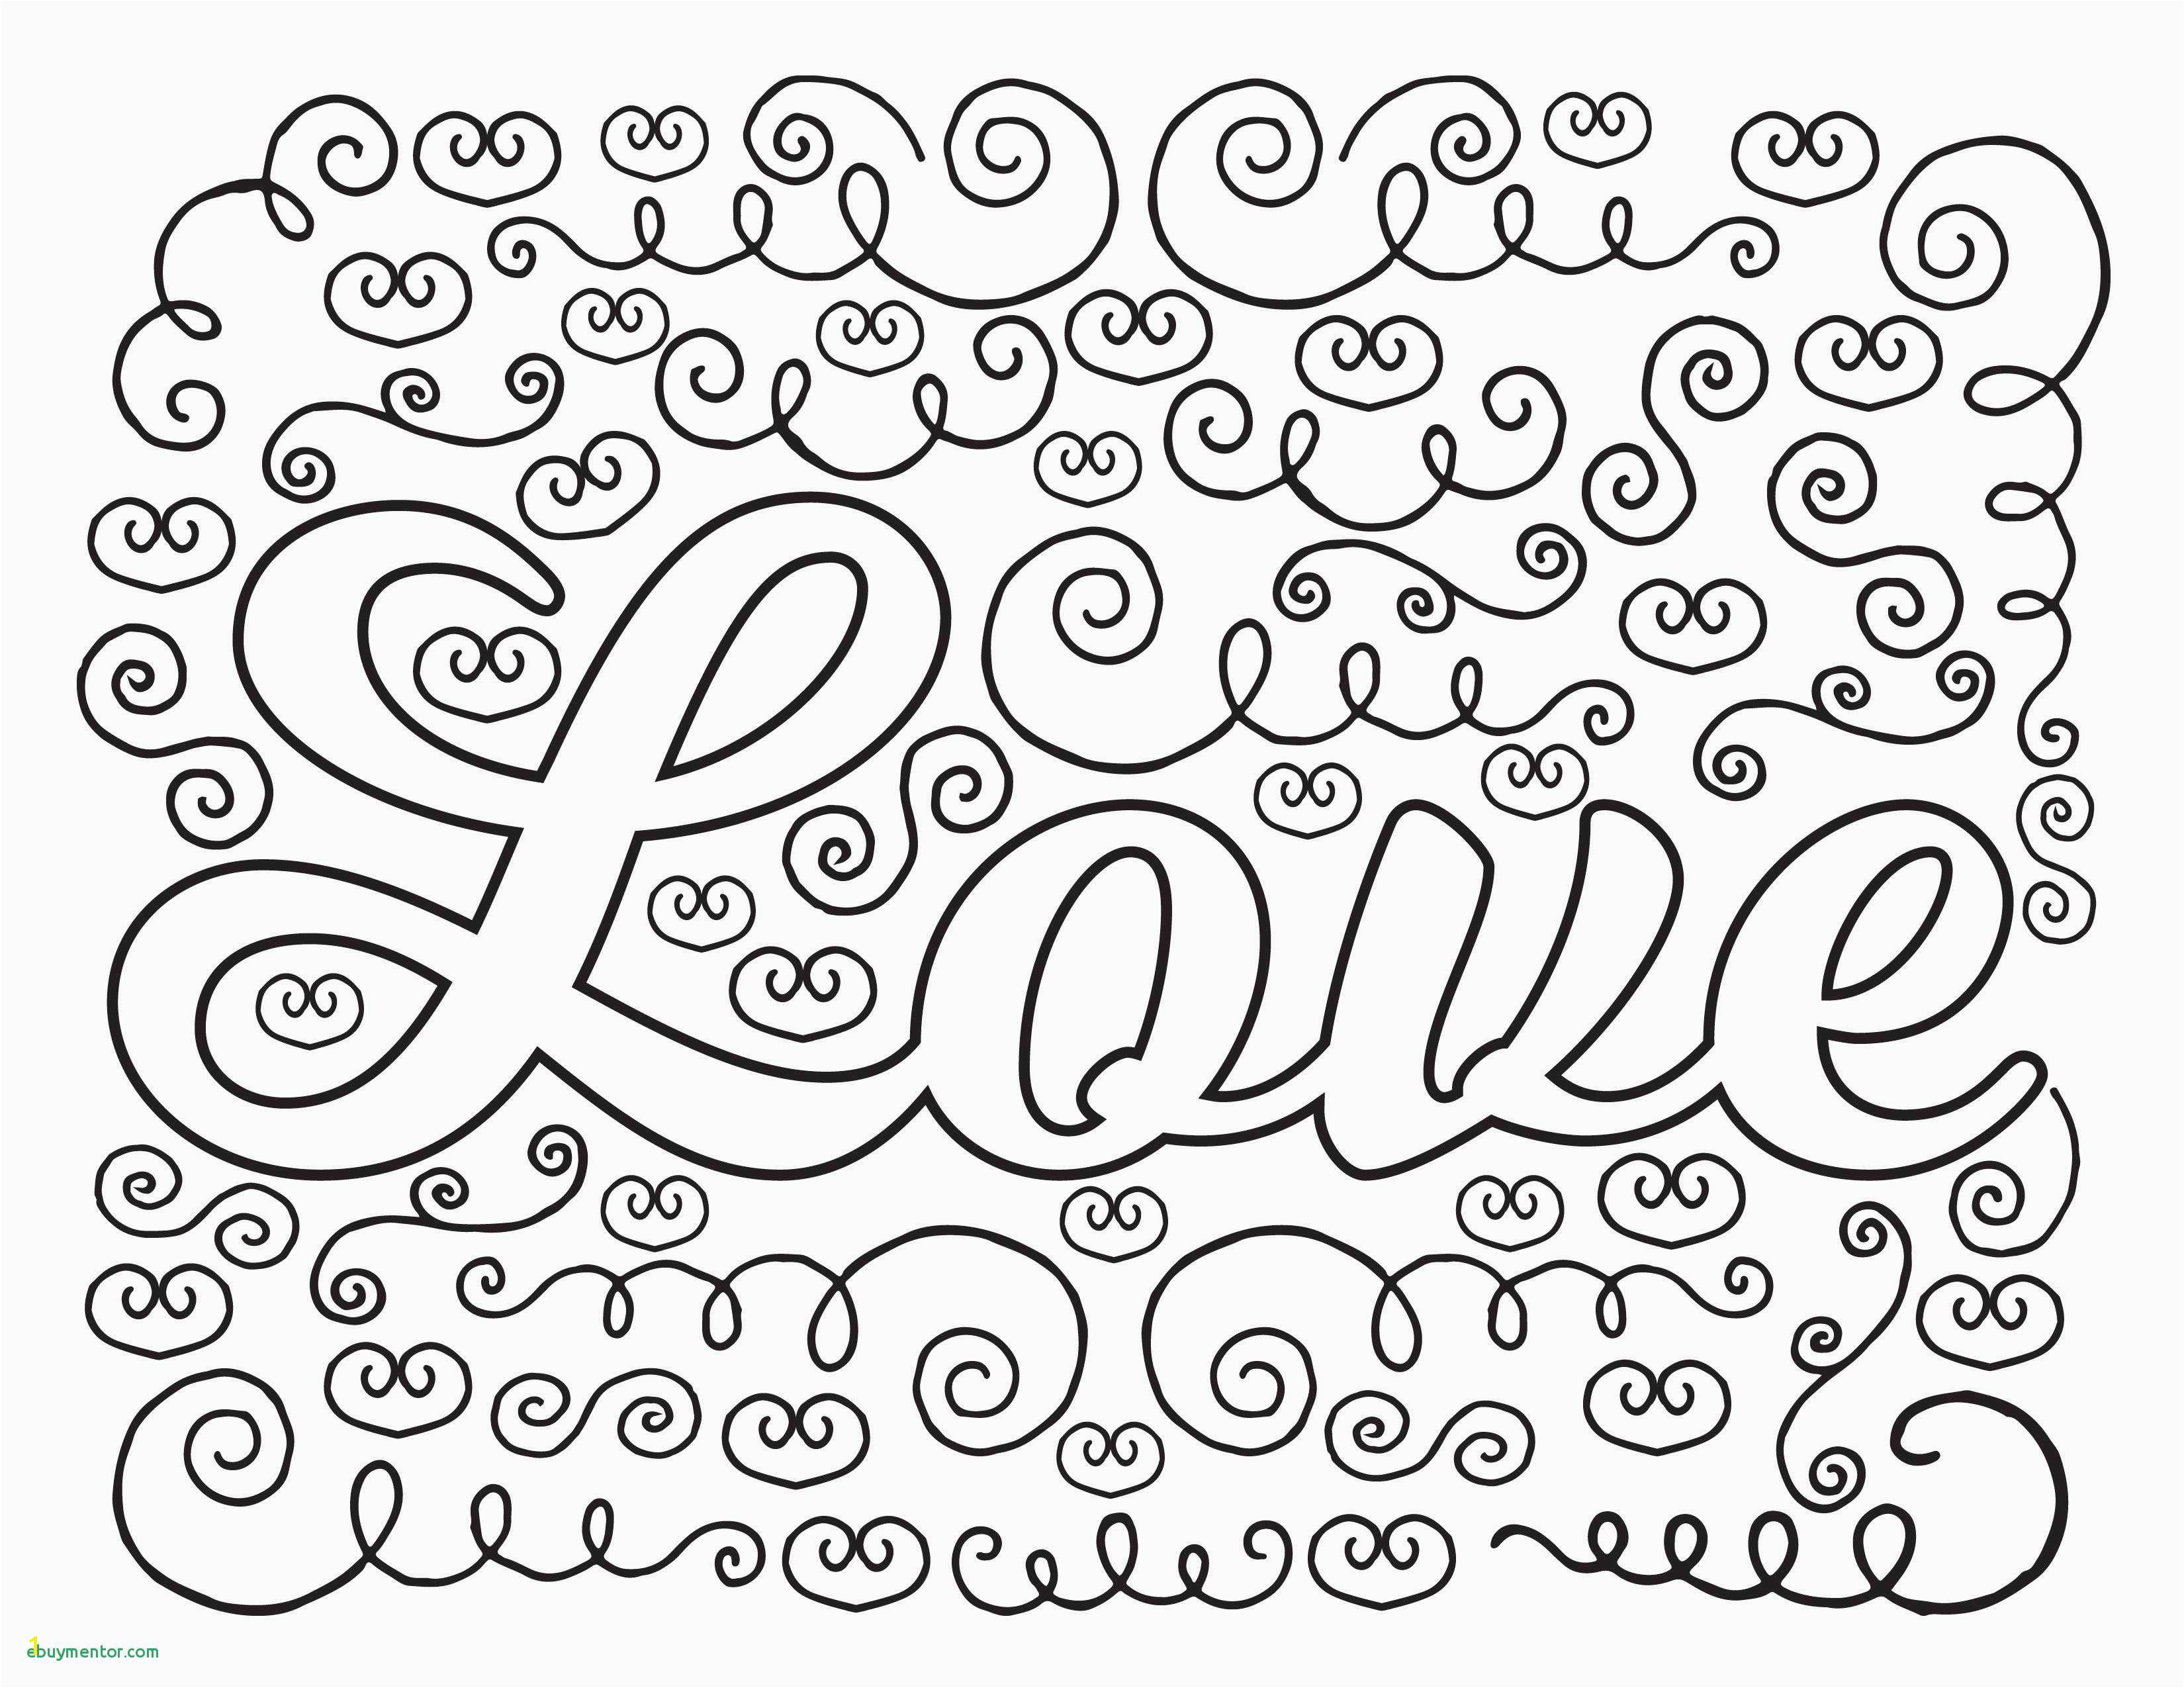 Free Printable Numbers Coloring Pages Color Number Coloring Pages Free Printable Kids Coloring Pages Beautiful